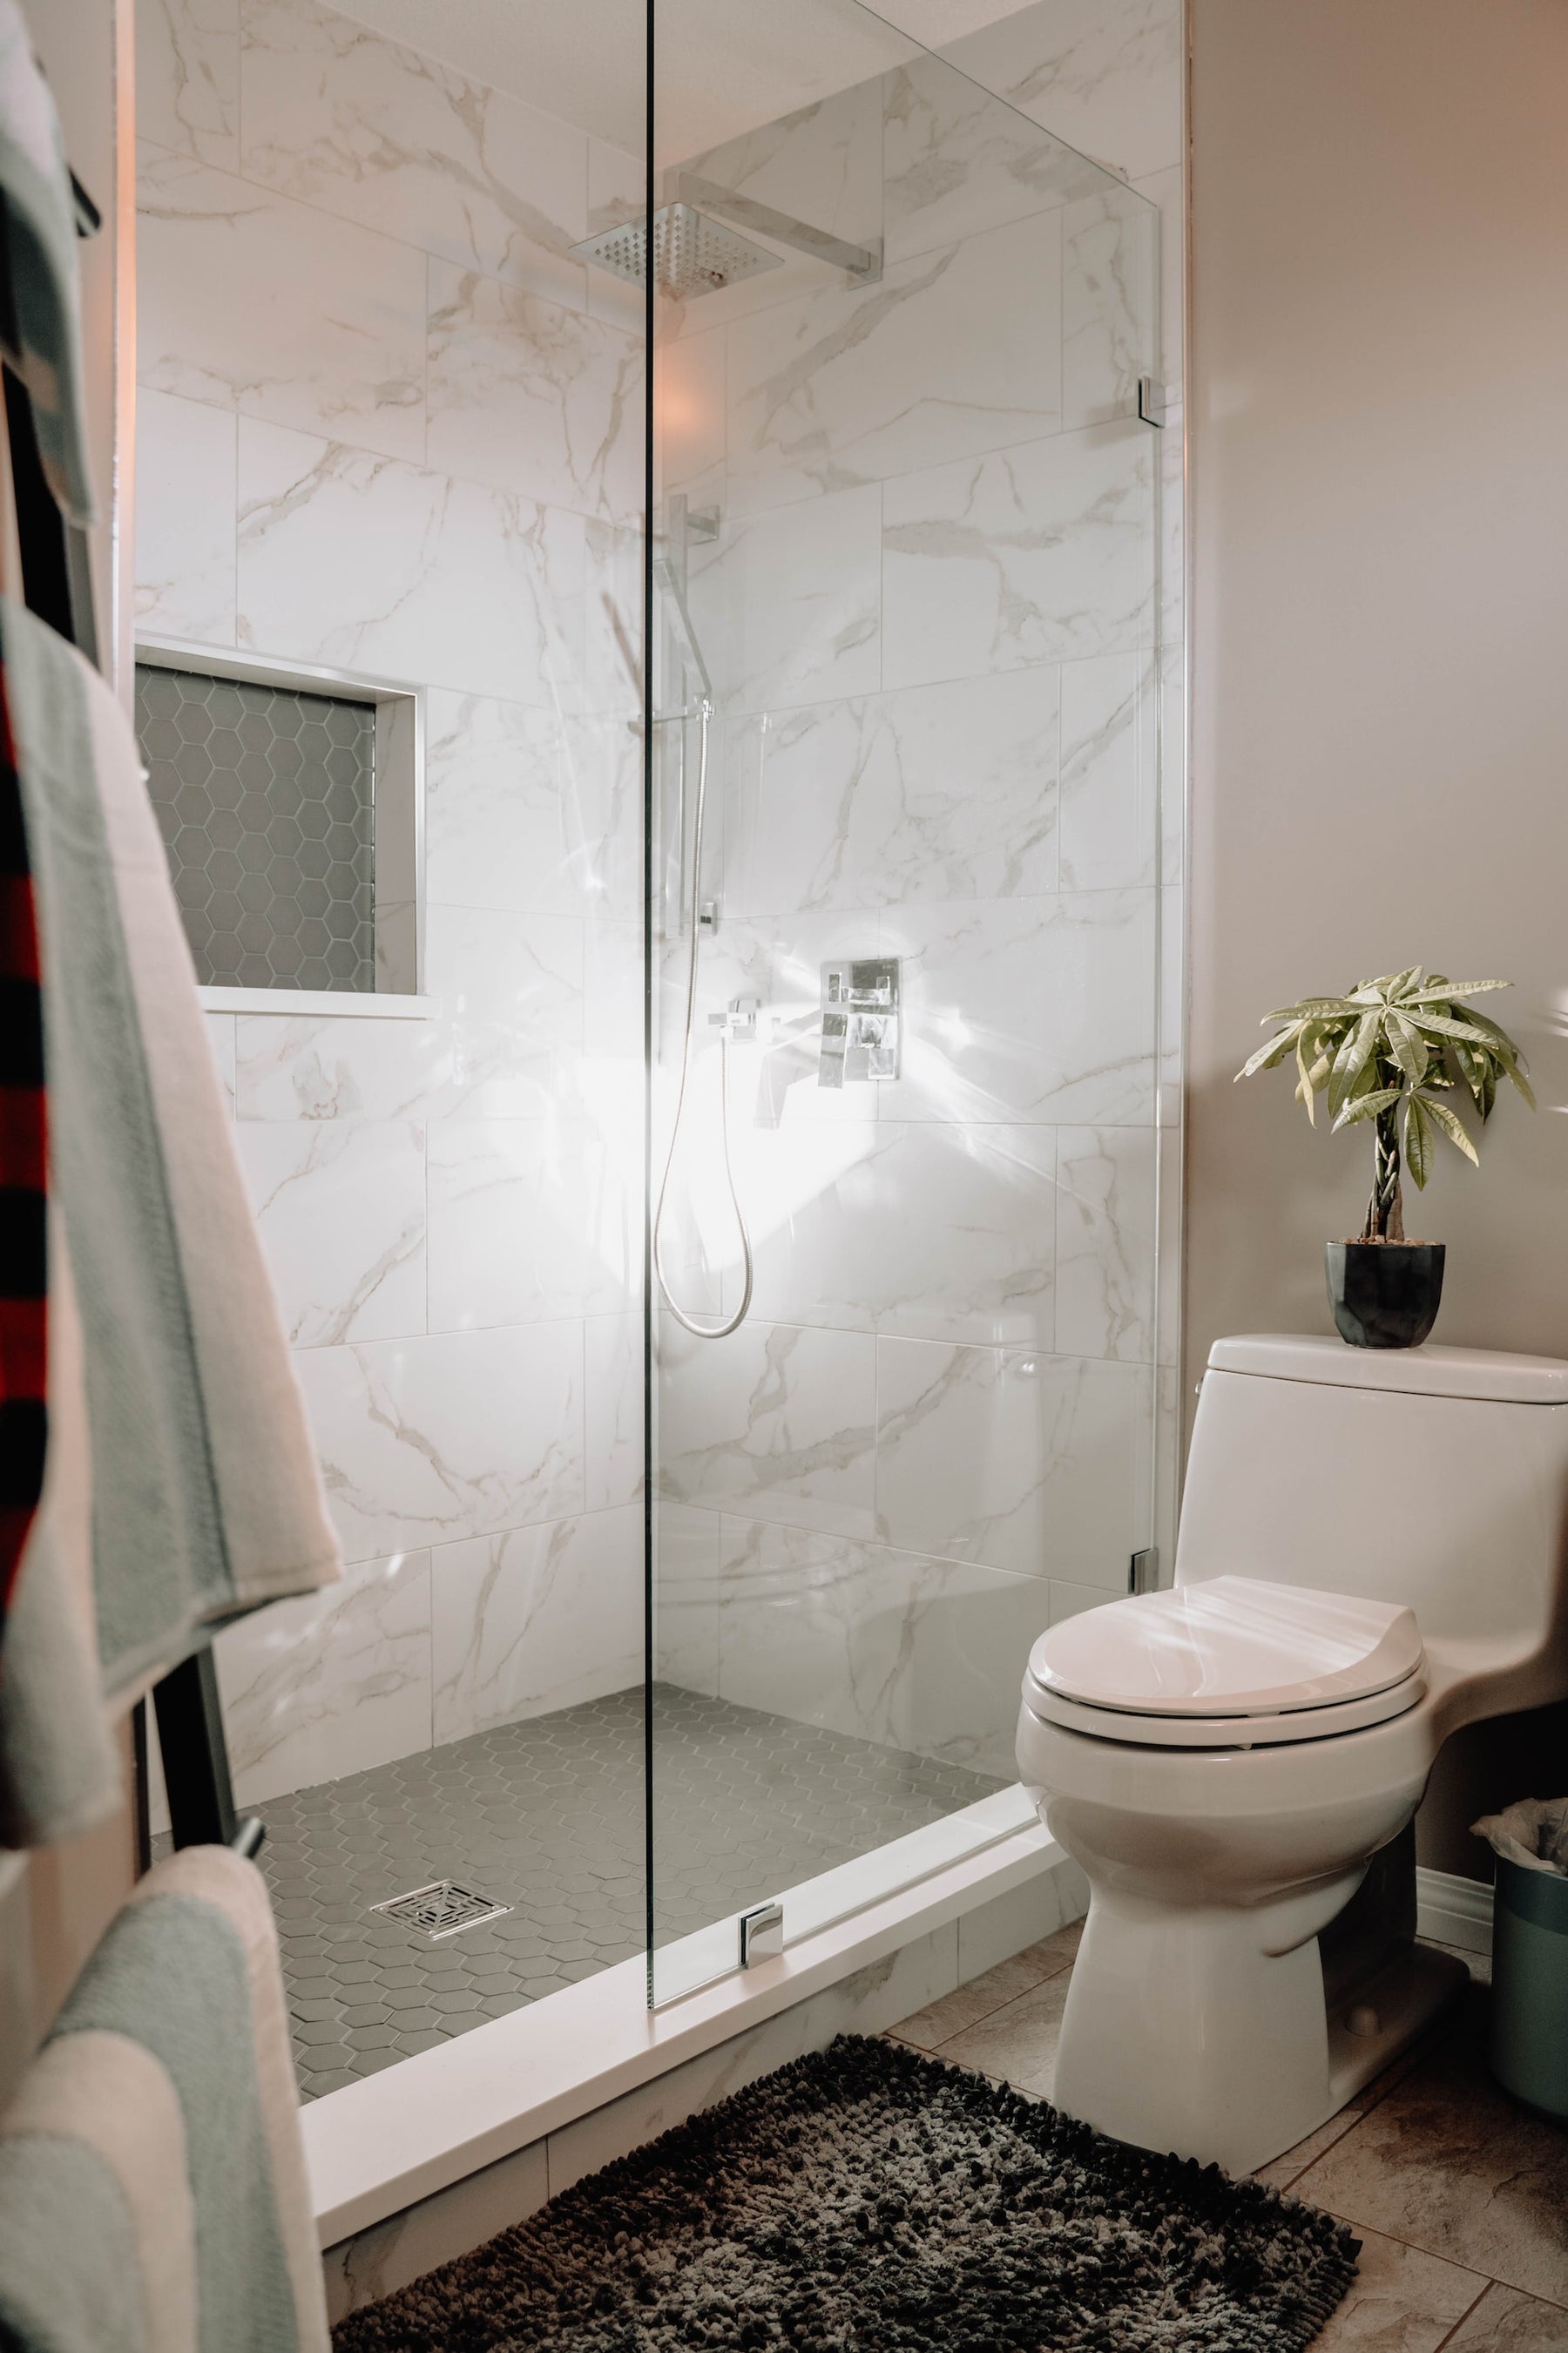 Transforming Your Bathroom: Replace a Bath with a Shower for Style and Functionality